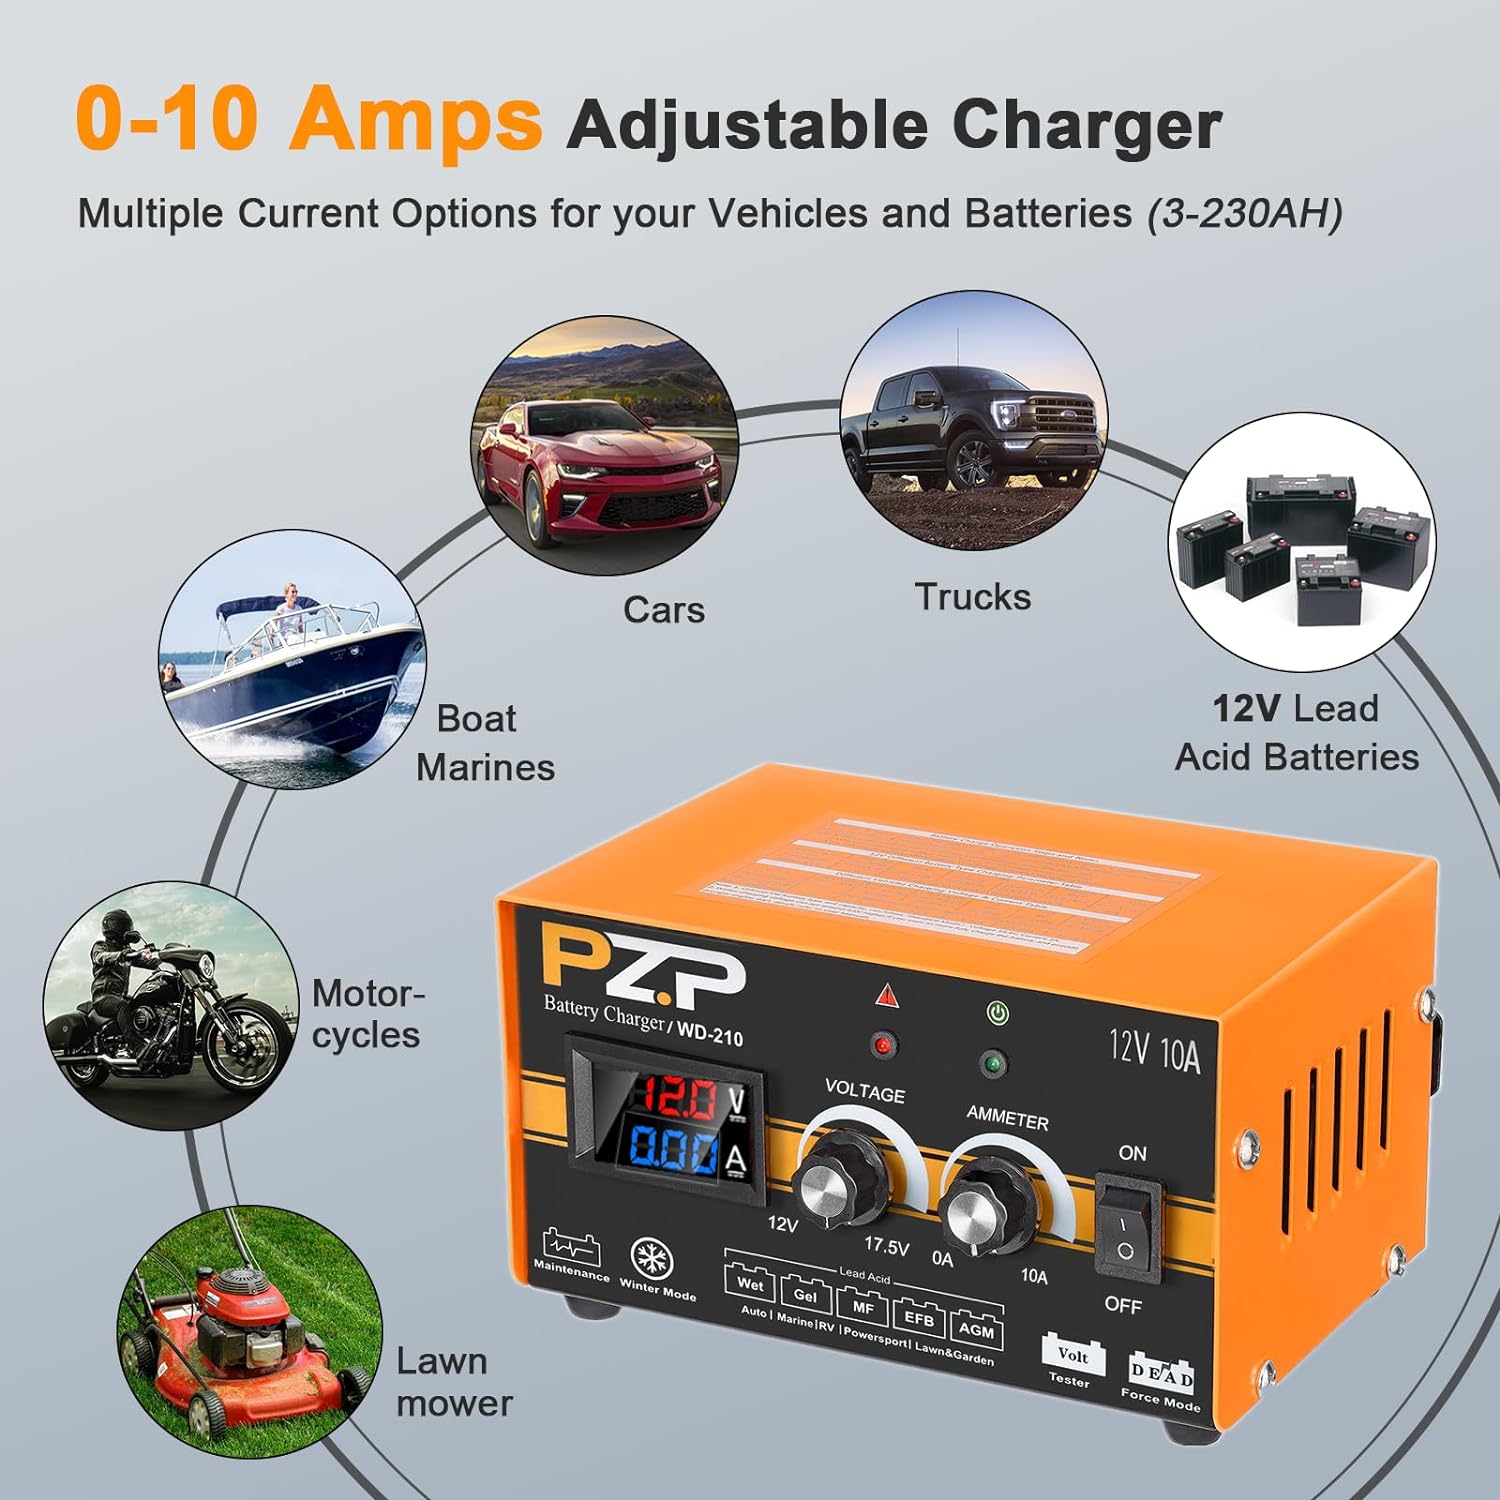 PZP 0-15A 12V 24V Car Battery Charger Automotive Motorcycle Boat Marine Trickle Charger 12 Volt 24 Volt Automobile Battery Charger Maintainer, Manual Deep Cycle Chargers - PZP 0-15A Car Battery Charger Review